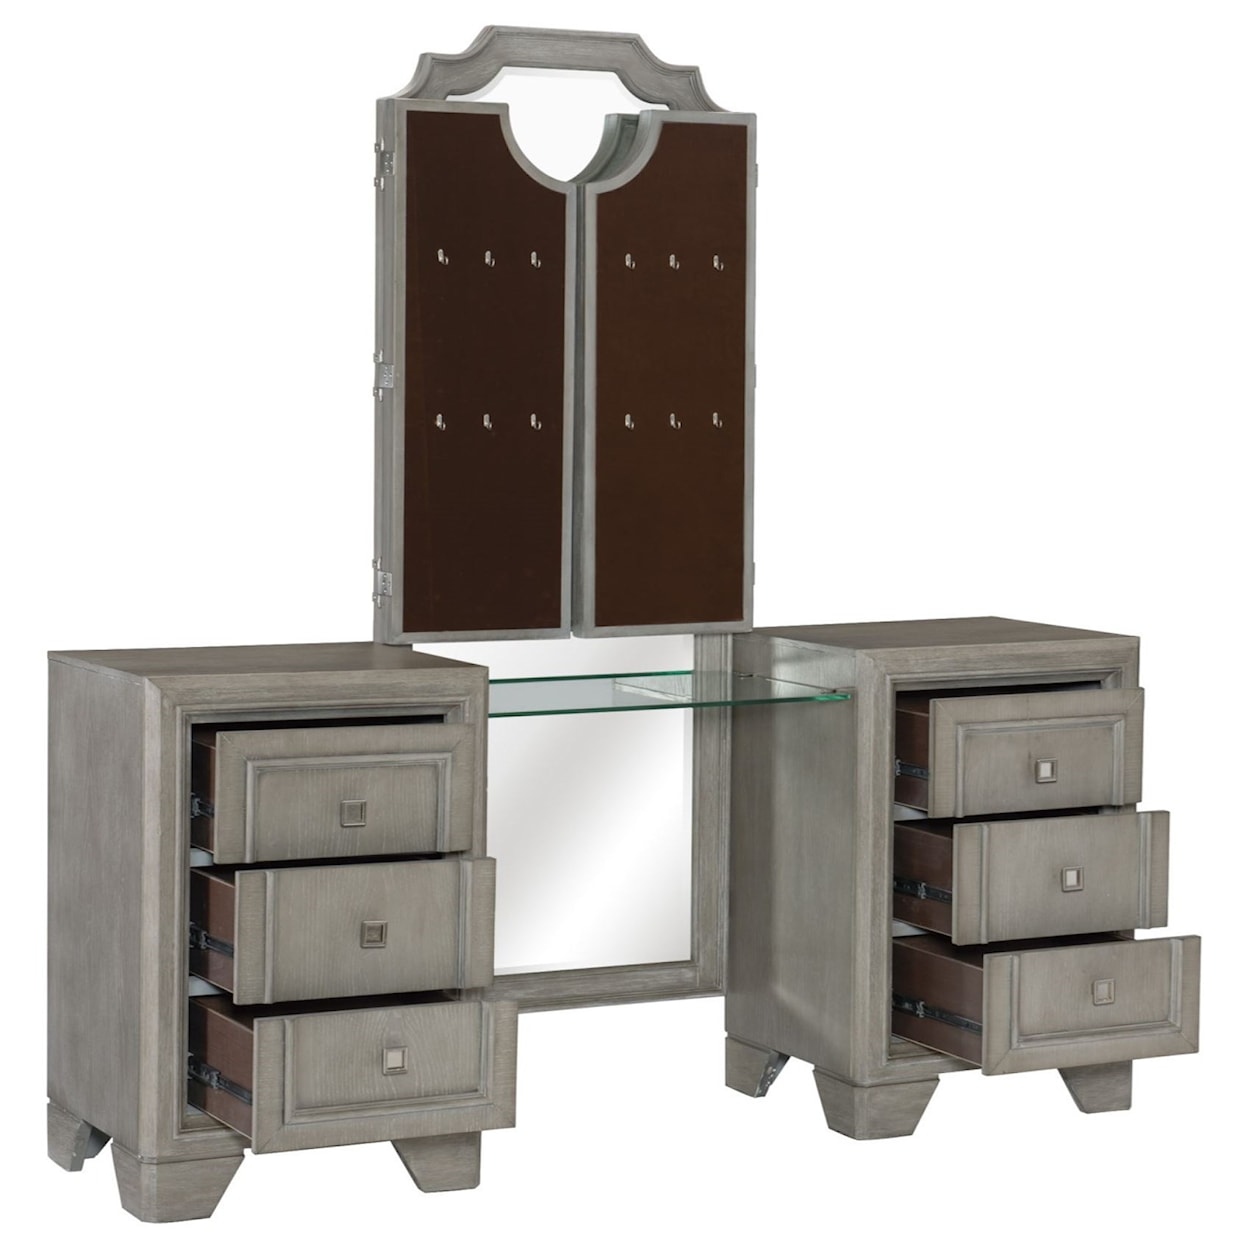 Homelegance Colchester Vanity Dress with Mirror